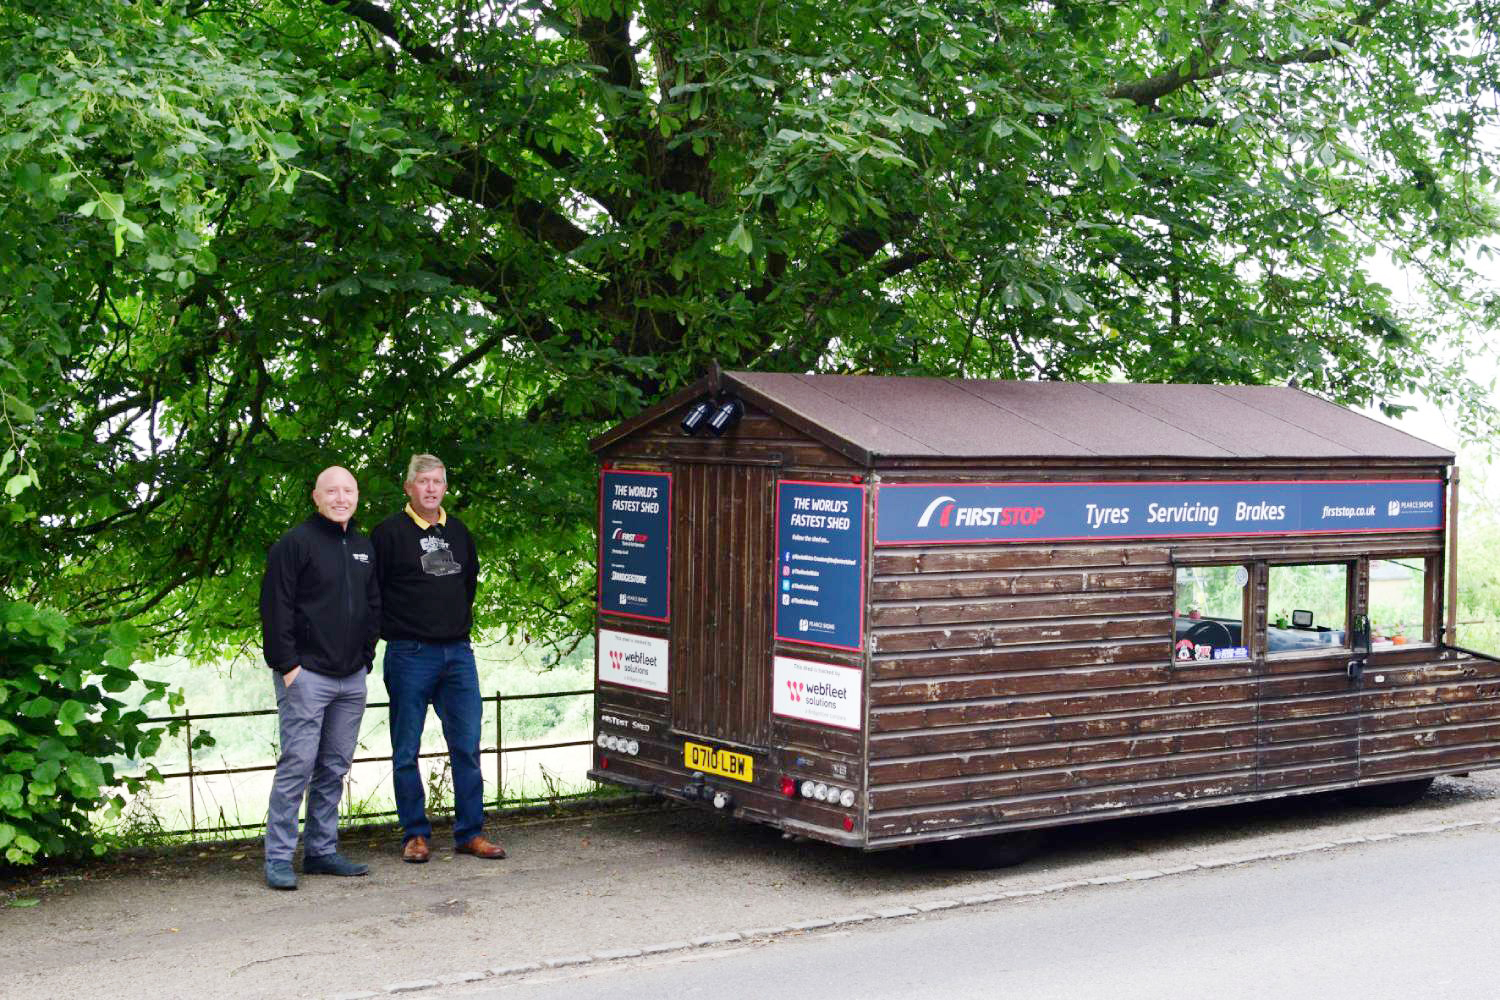 First Stop, Webfleet Solutions partner for World’s Fastest Shed